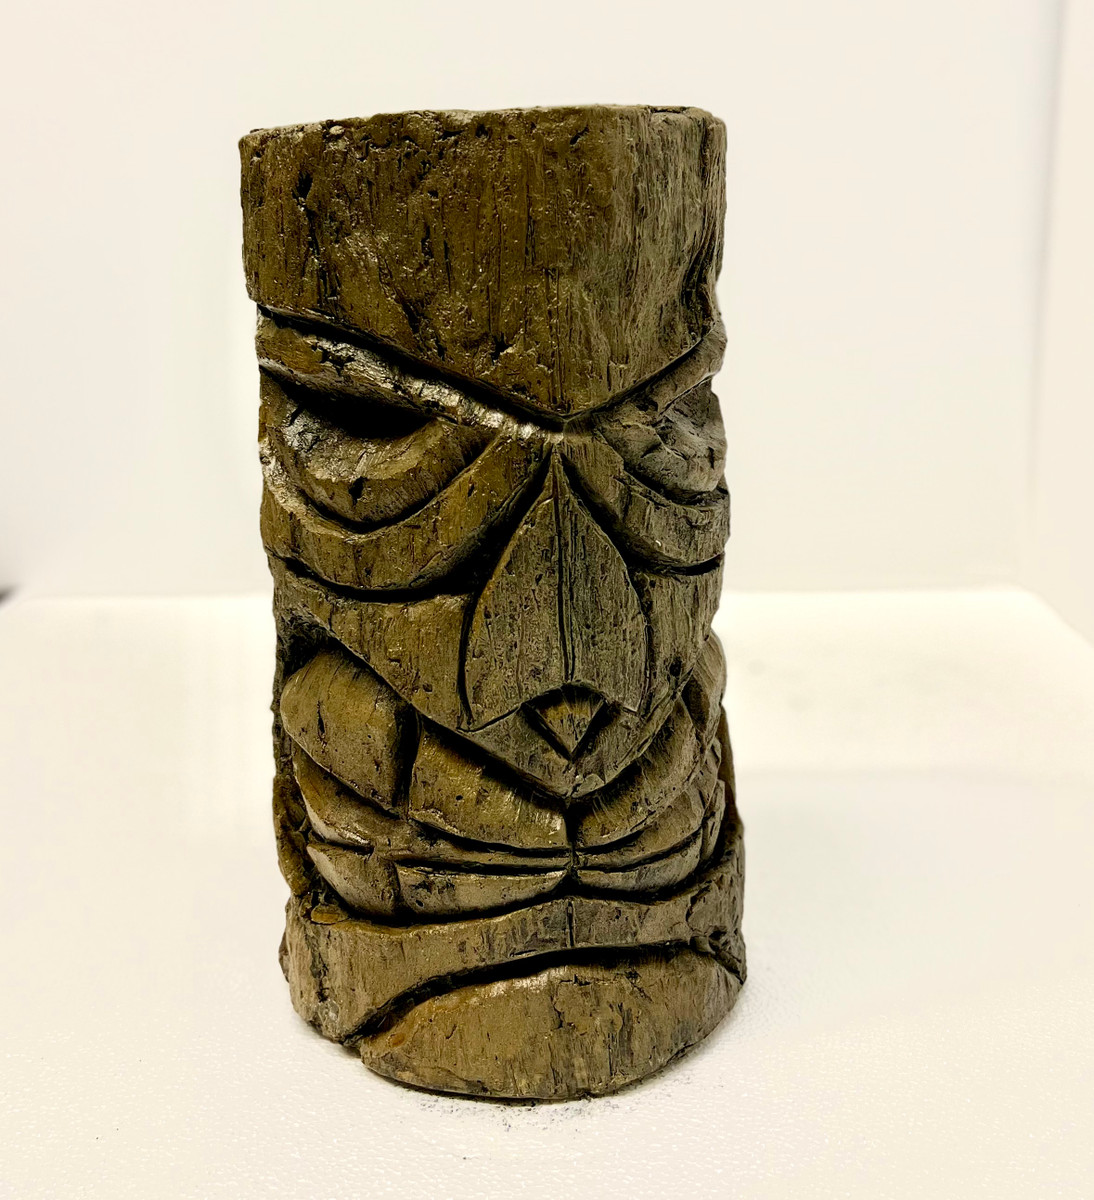 Hand sculpted cast stone tiki from Athena Garden is a rustic tiki sculpture, manufactured in a cast stone concrete. This uniquely designed tiki statue is suited for many decor settings. Tiki bar, beach, poolside setting, or just as garden decor in your outdoor landscape. This tiki man is designed and made right here in the USA.
